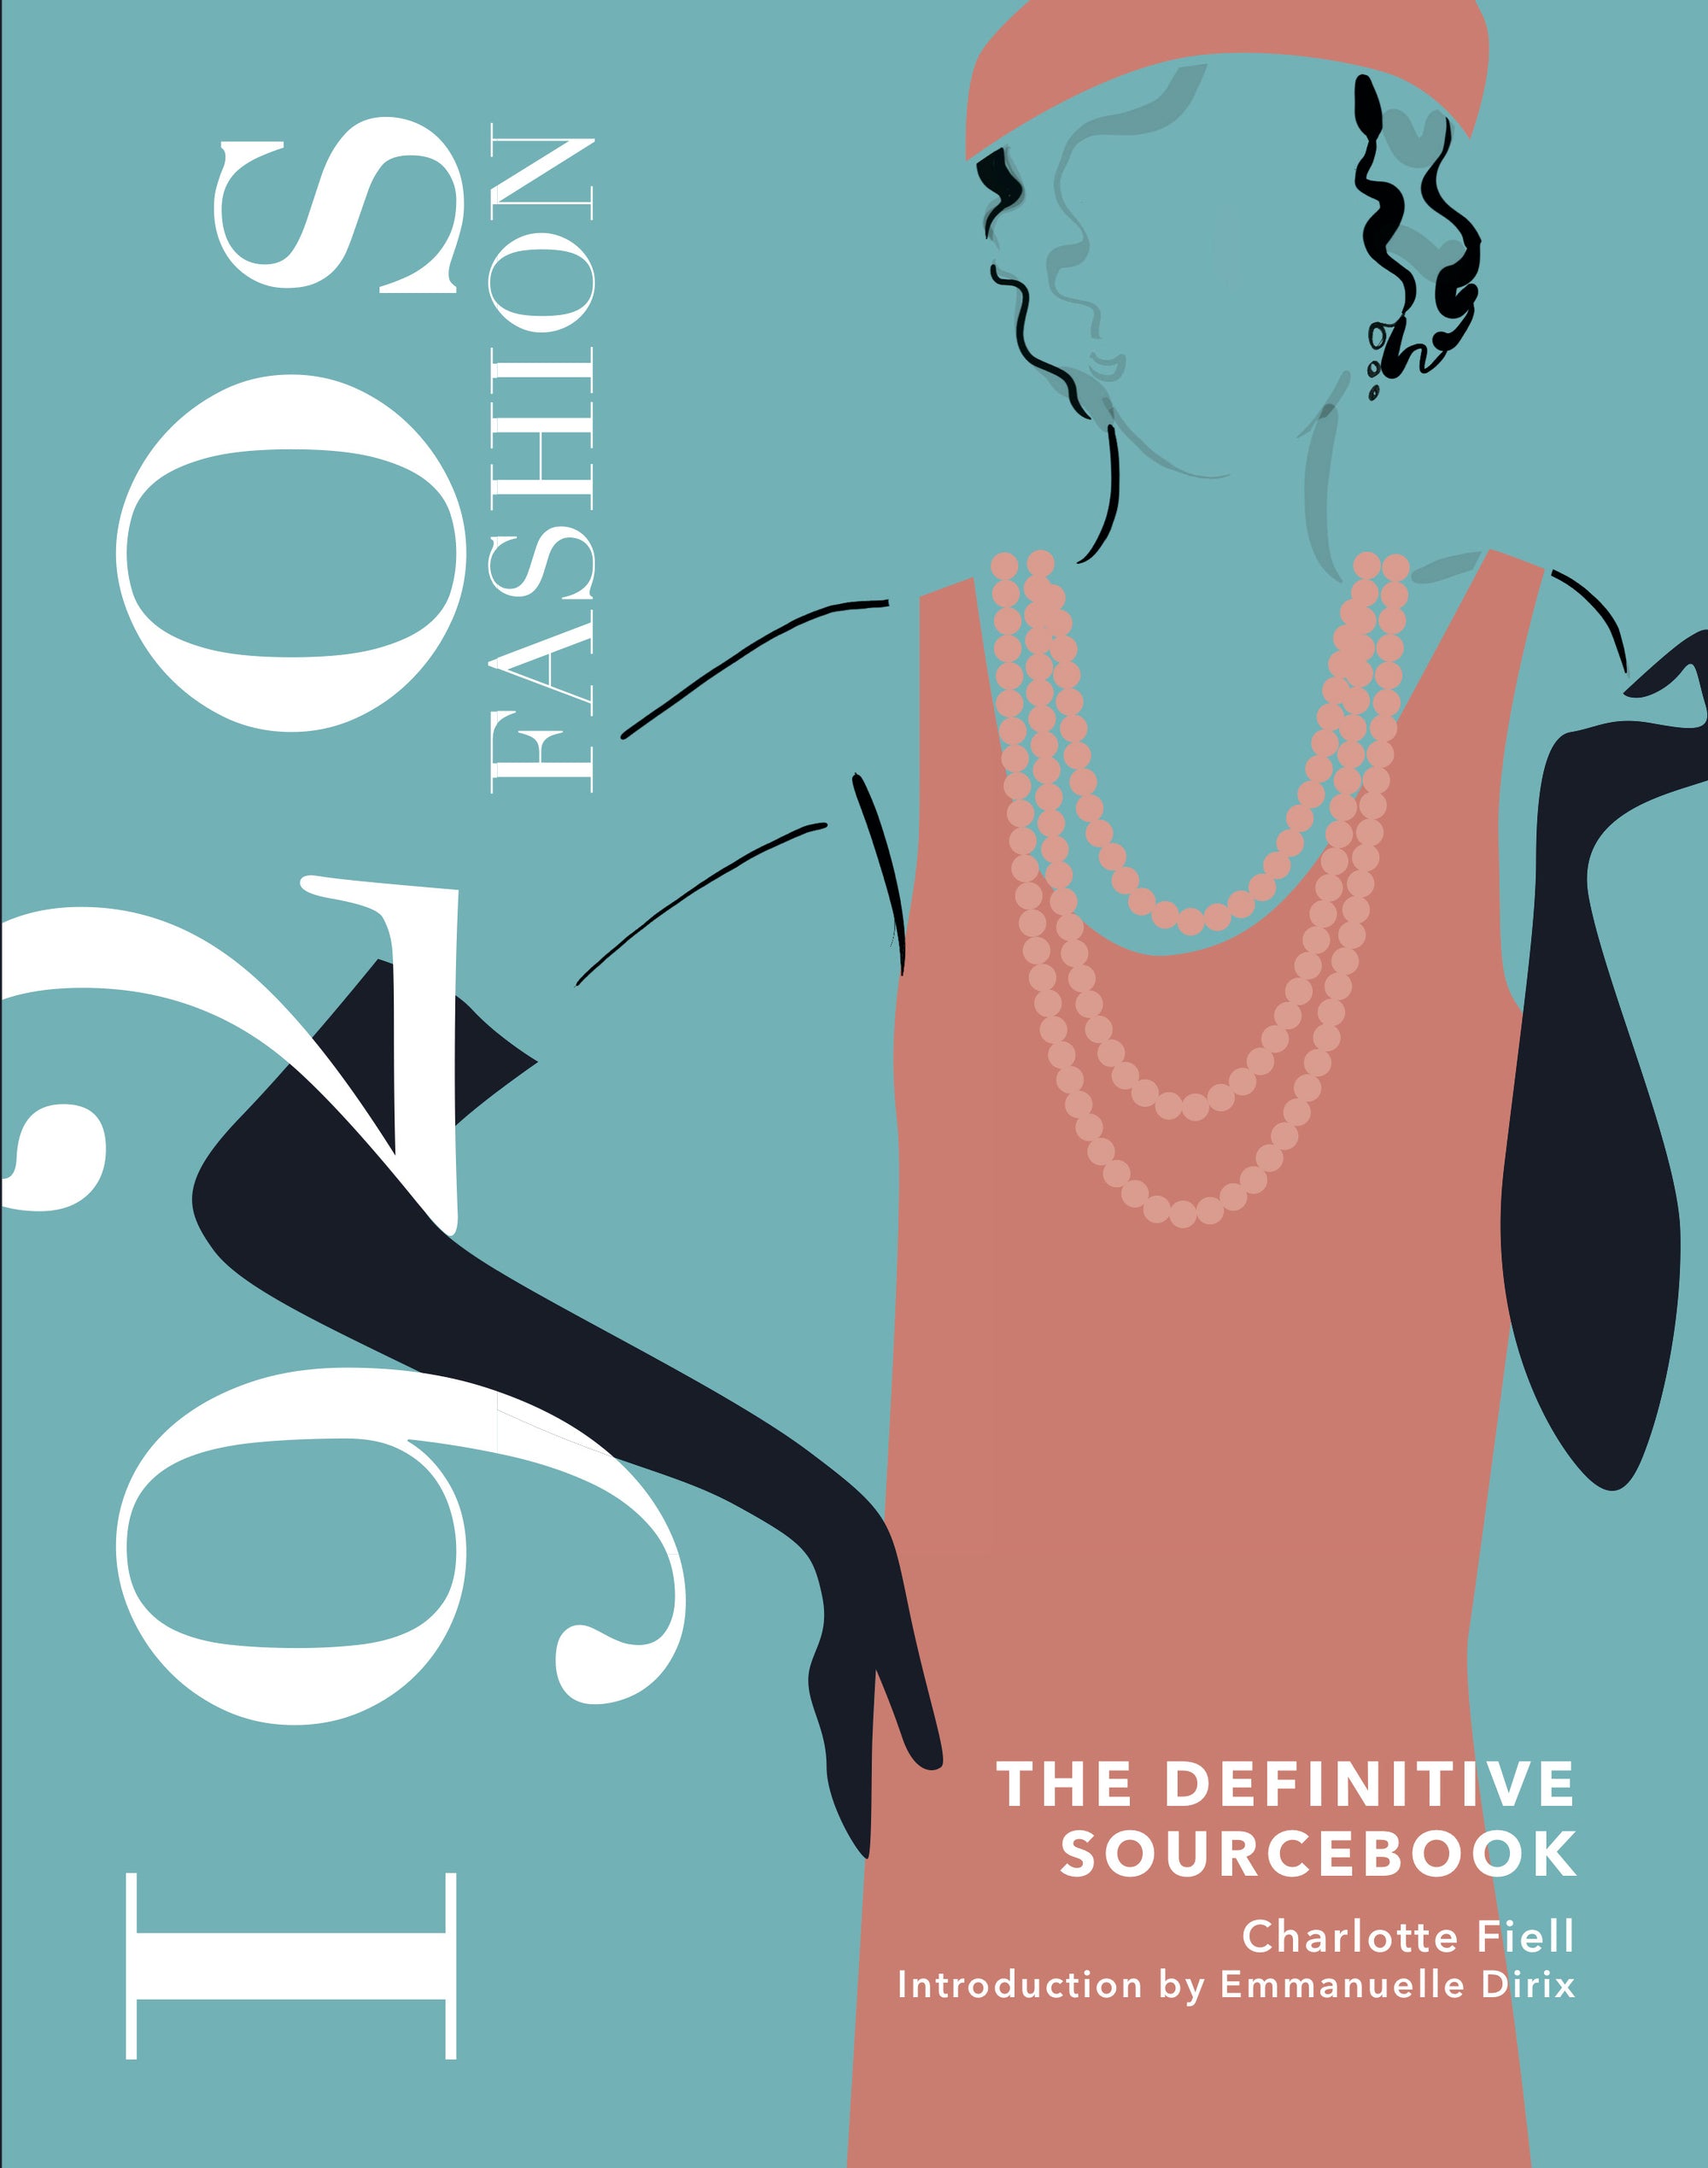 1920s Fashion: The Definitive Sourcebook